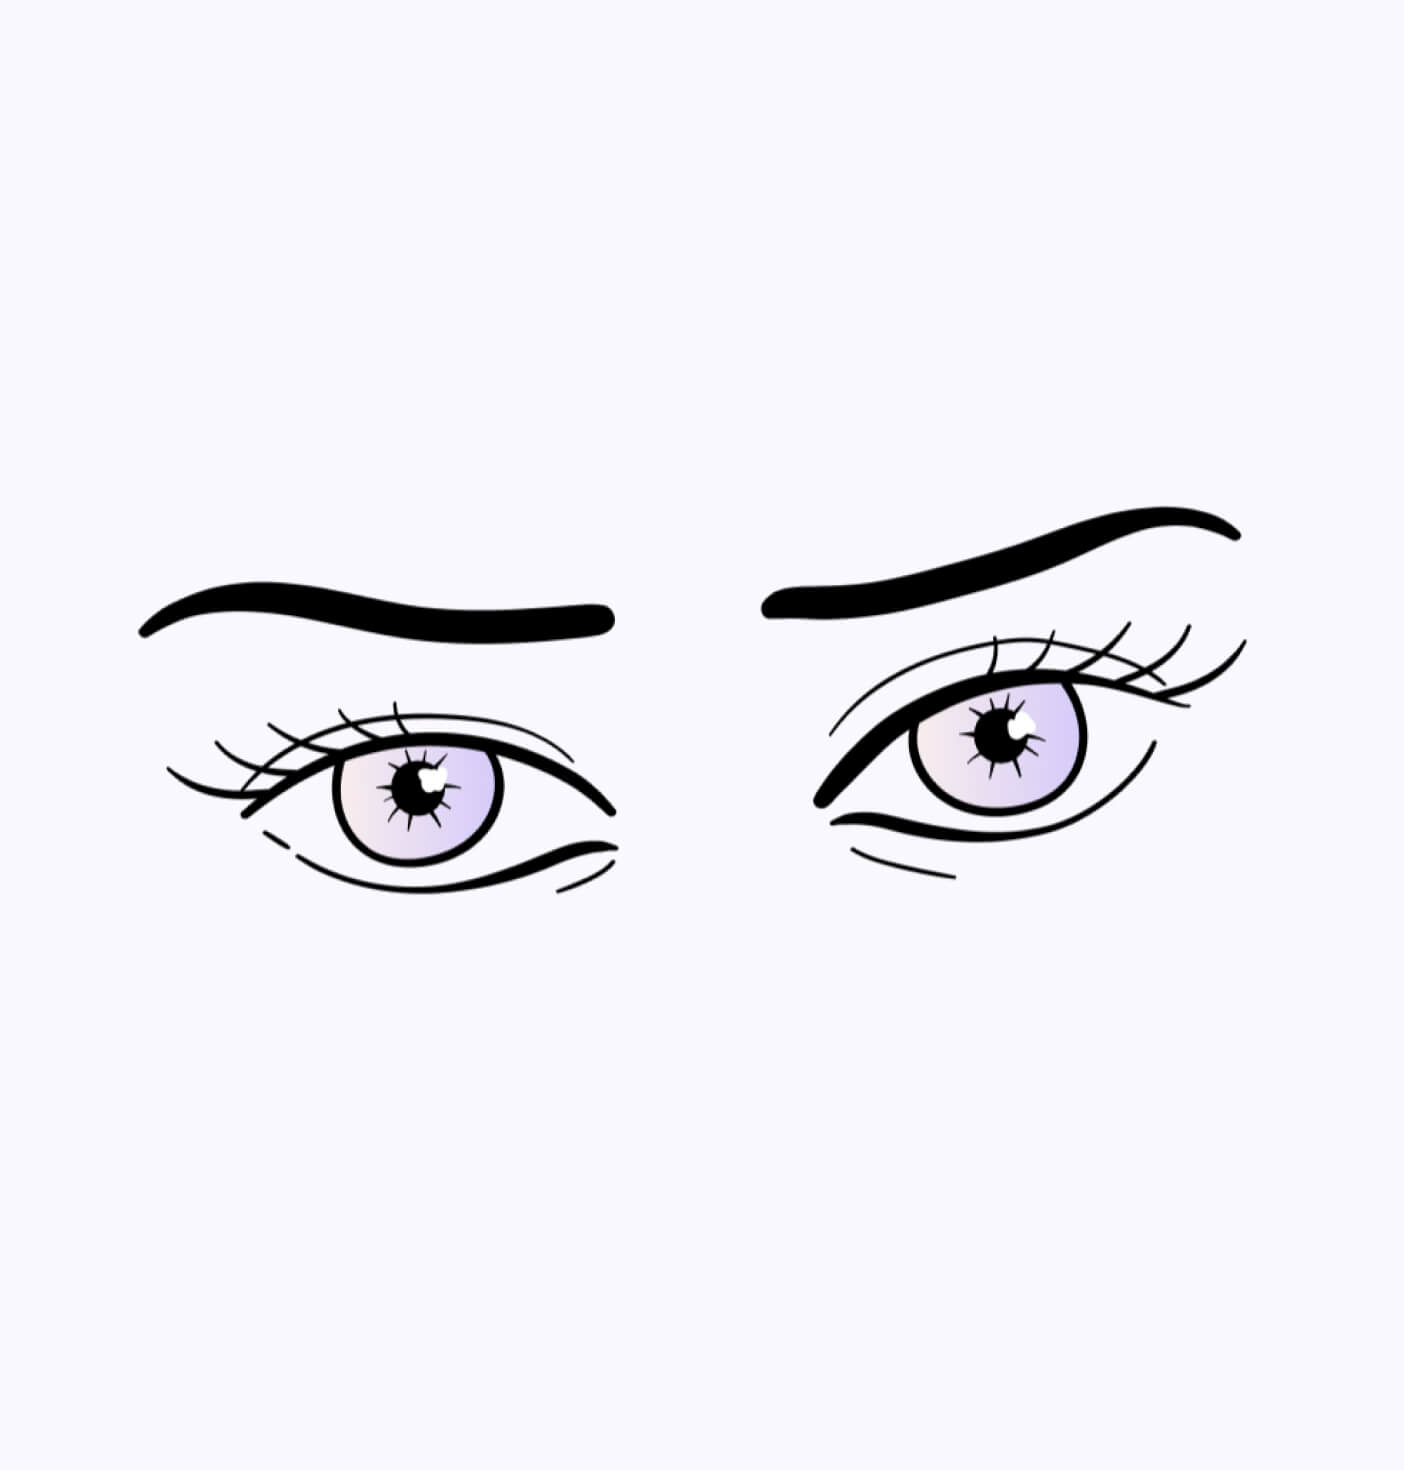 Illustration of open eyes with eyebrows